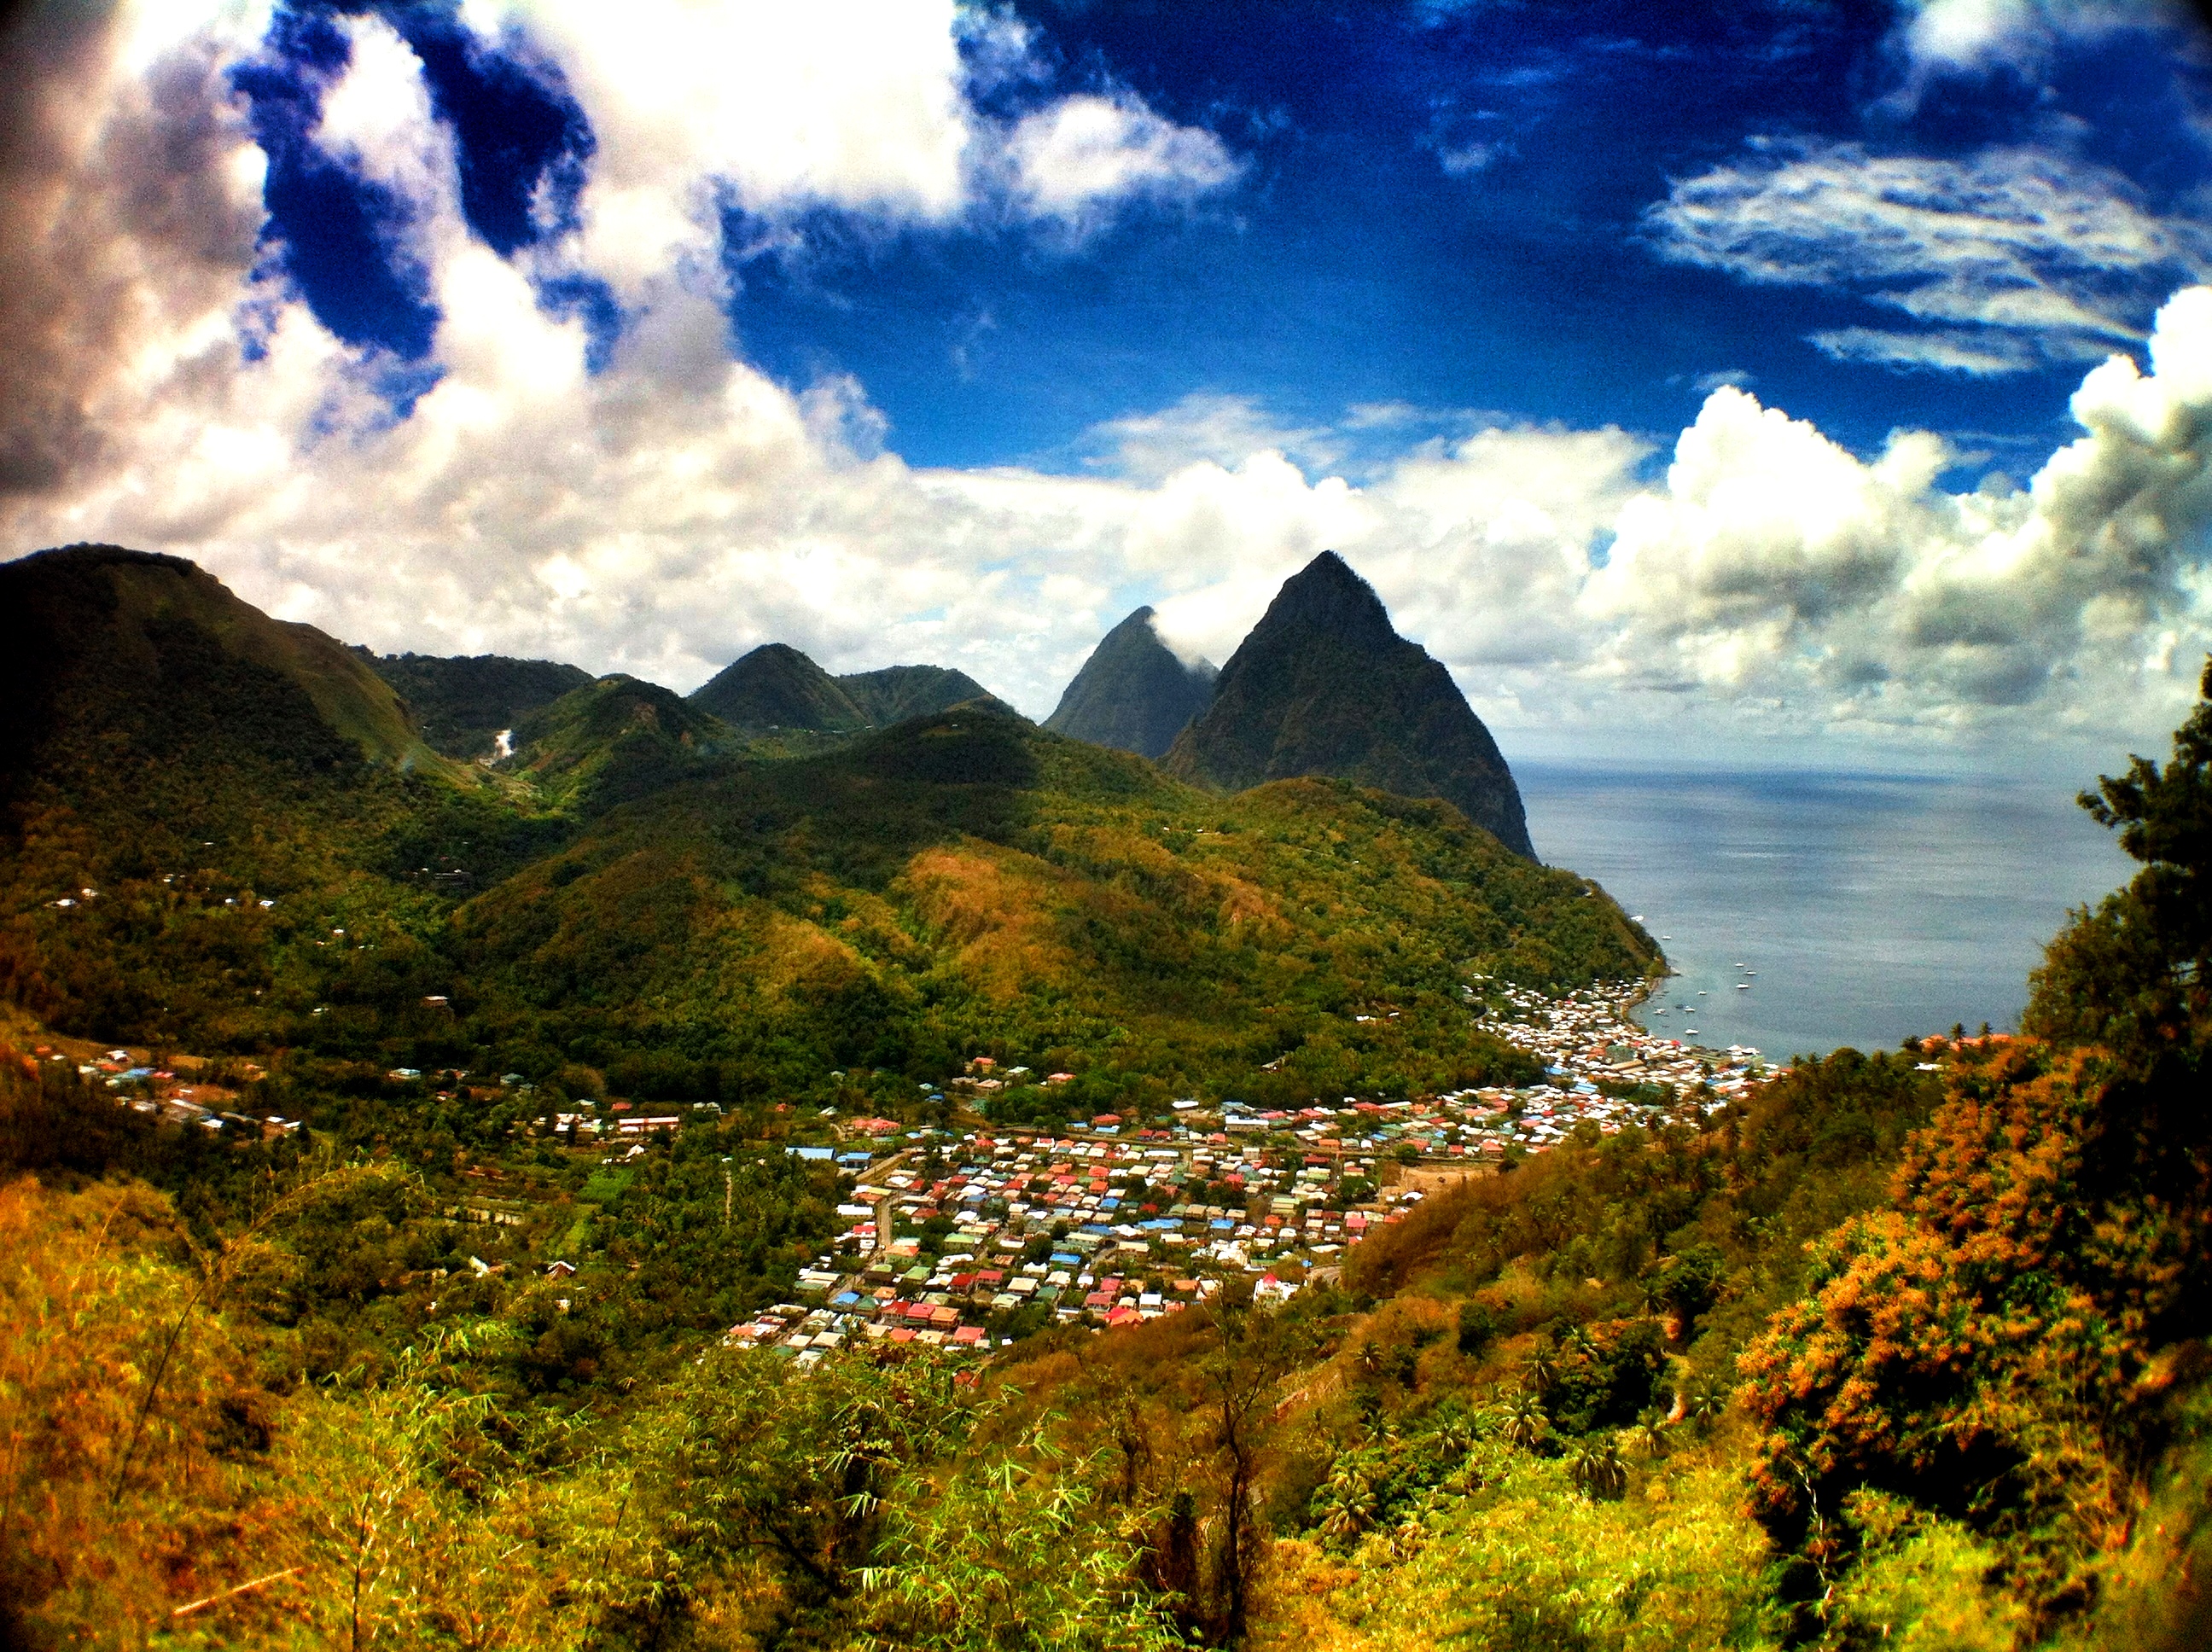 Discovering the Difference Between Traveling and Vacationing While in St. Lucia